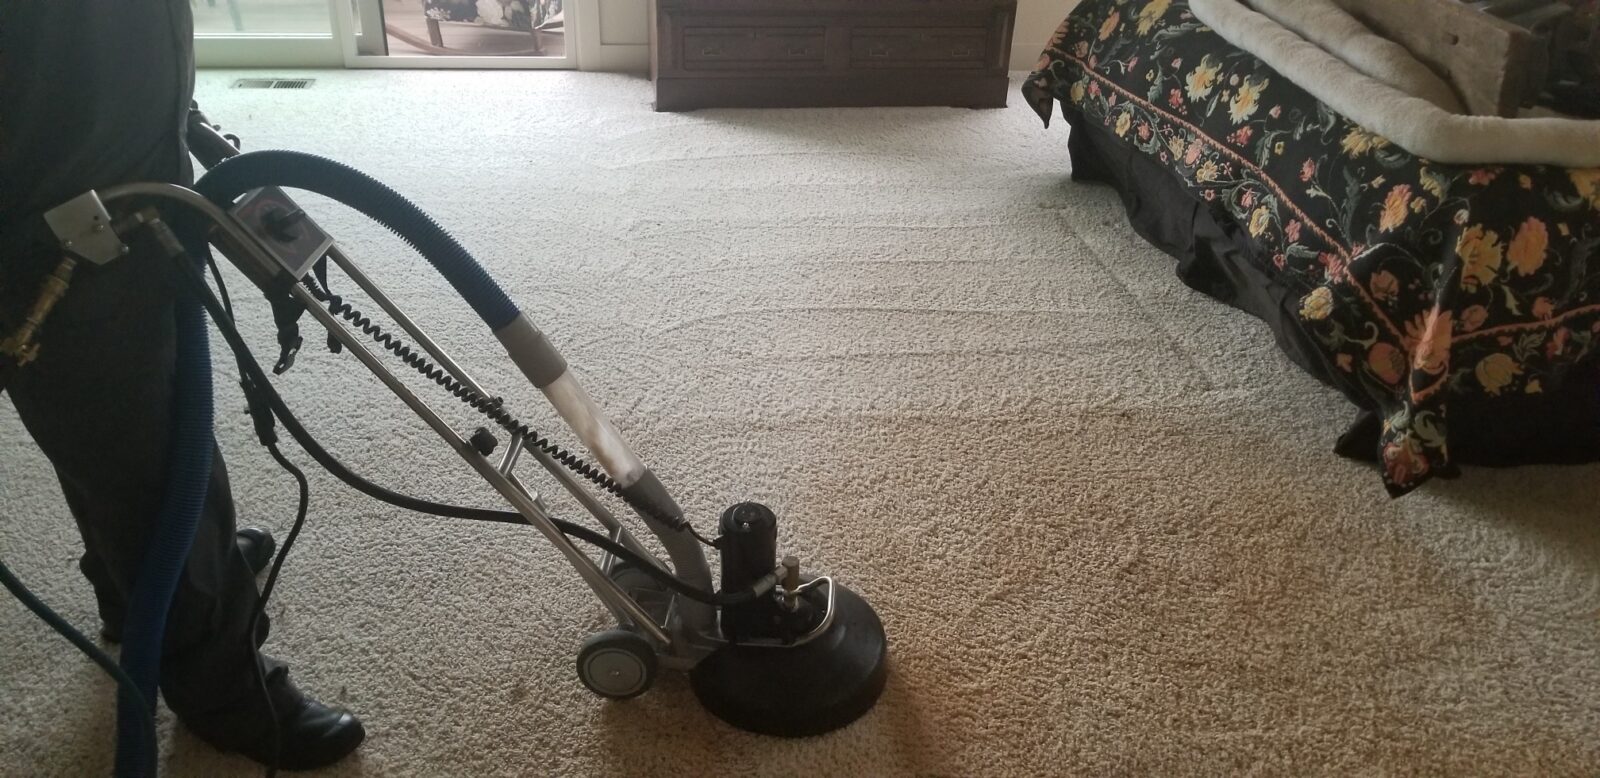 Residential Carpet Cleaning Company